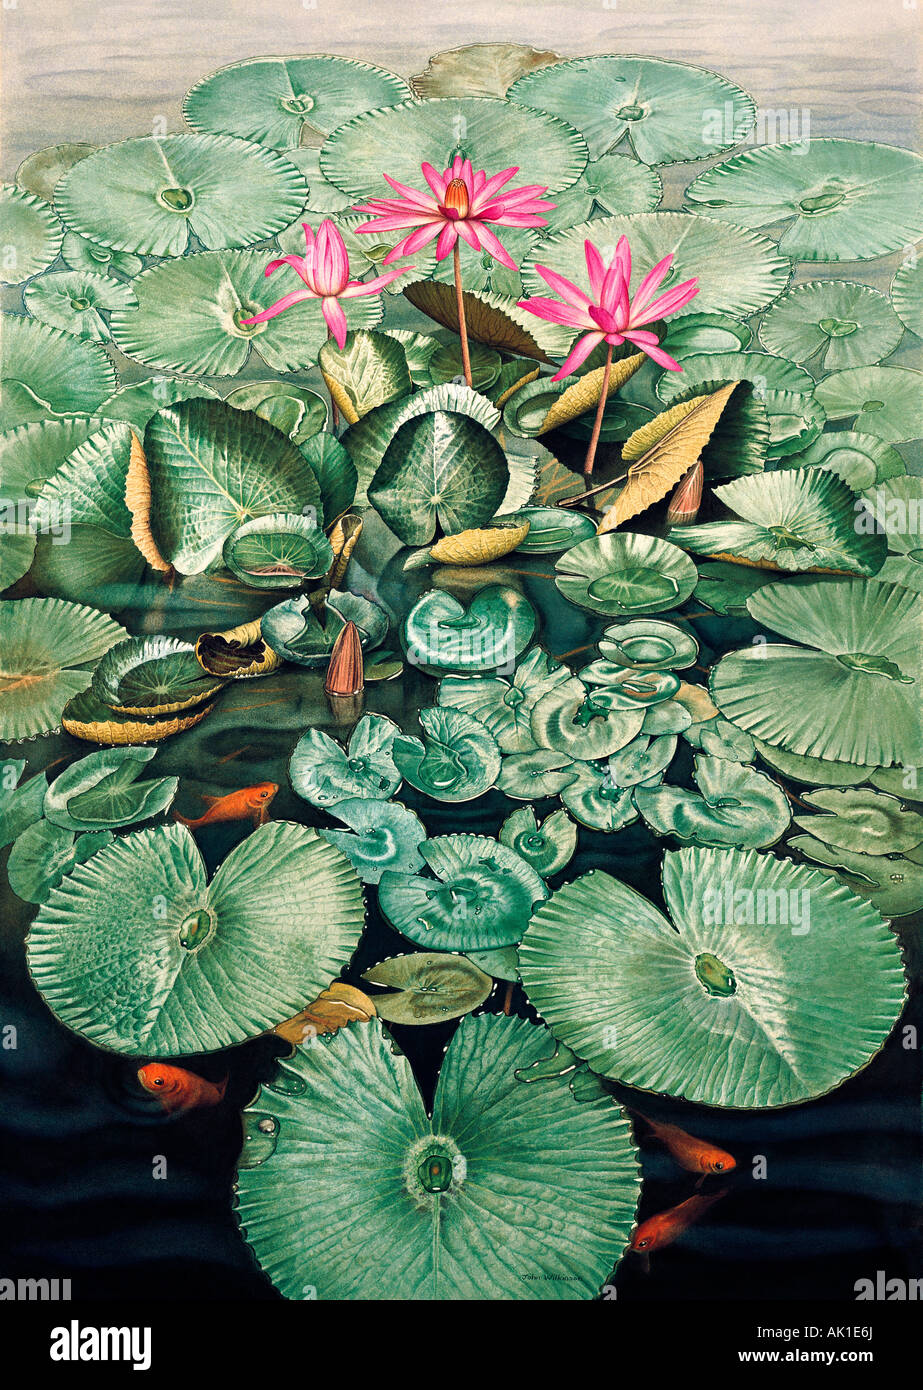 Artwork, Illustration of lilies in pond with Goldfish. Stock Photo